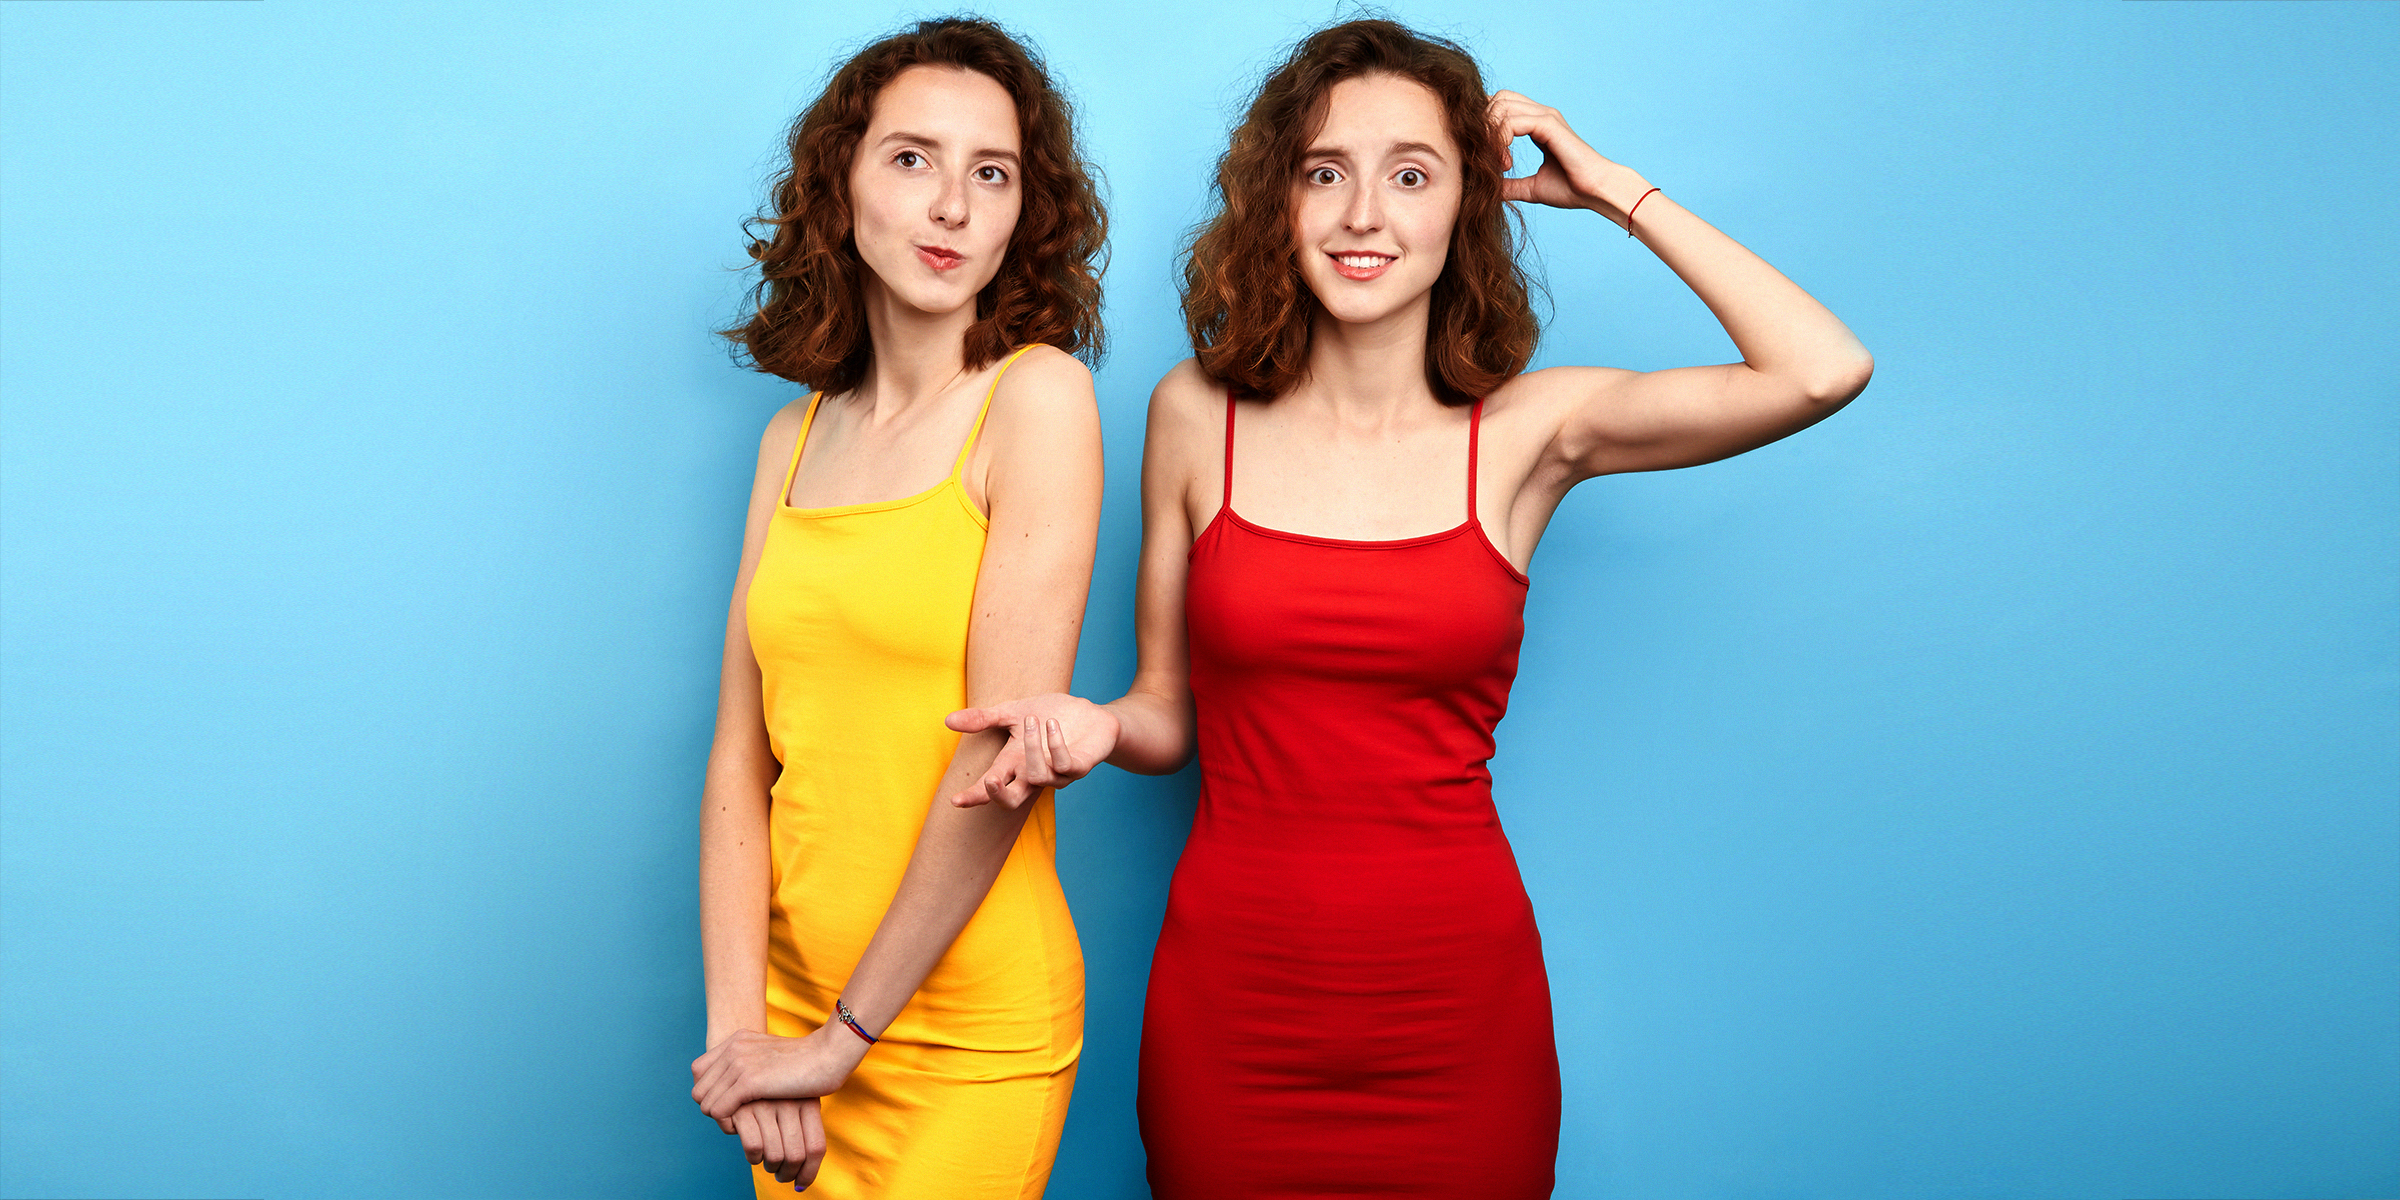 Two women wearing dresses cinched at the waist | Source: Shutterstock